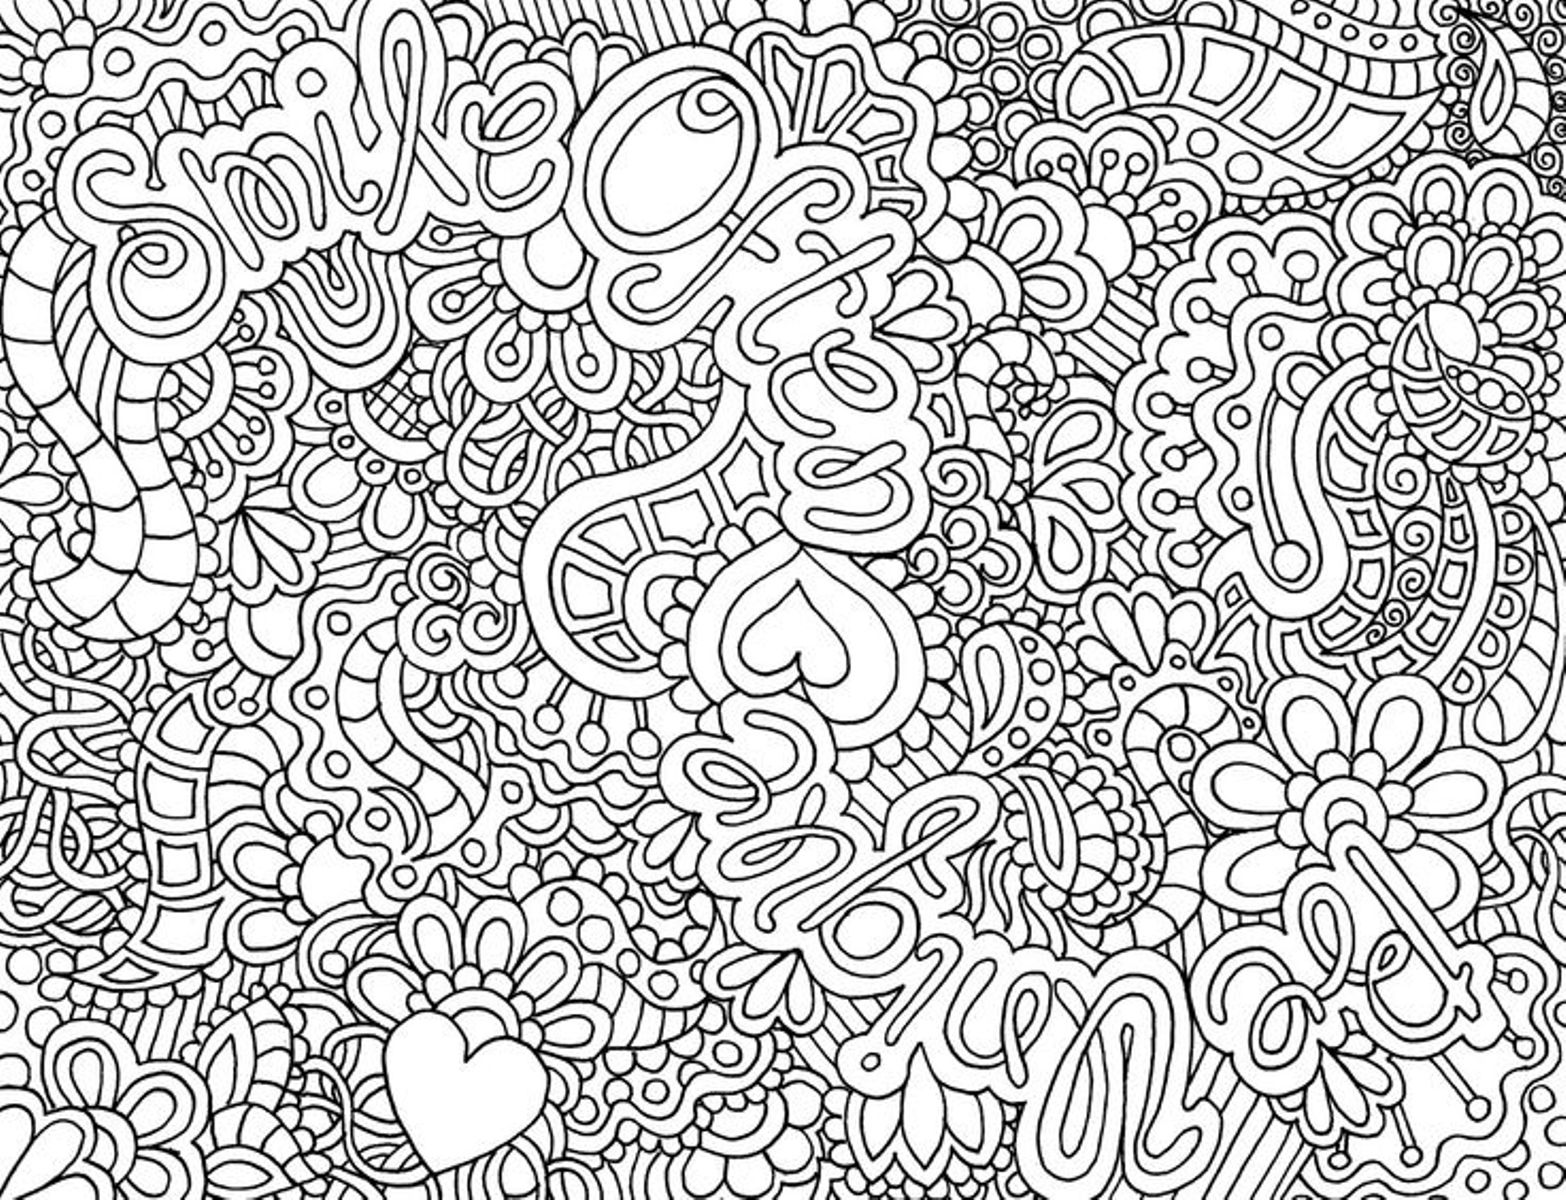 570 Top Coloring Pages For Adults Hard Pictures